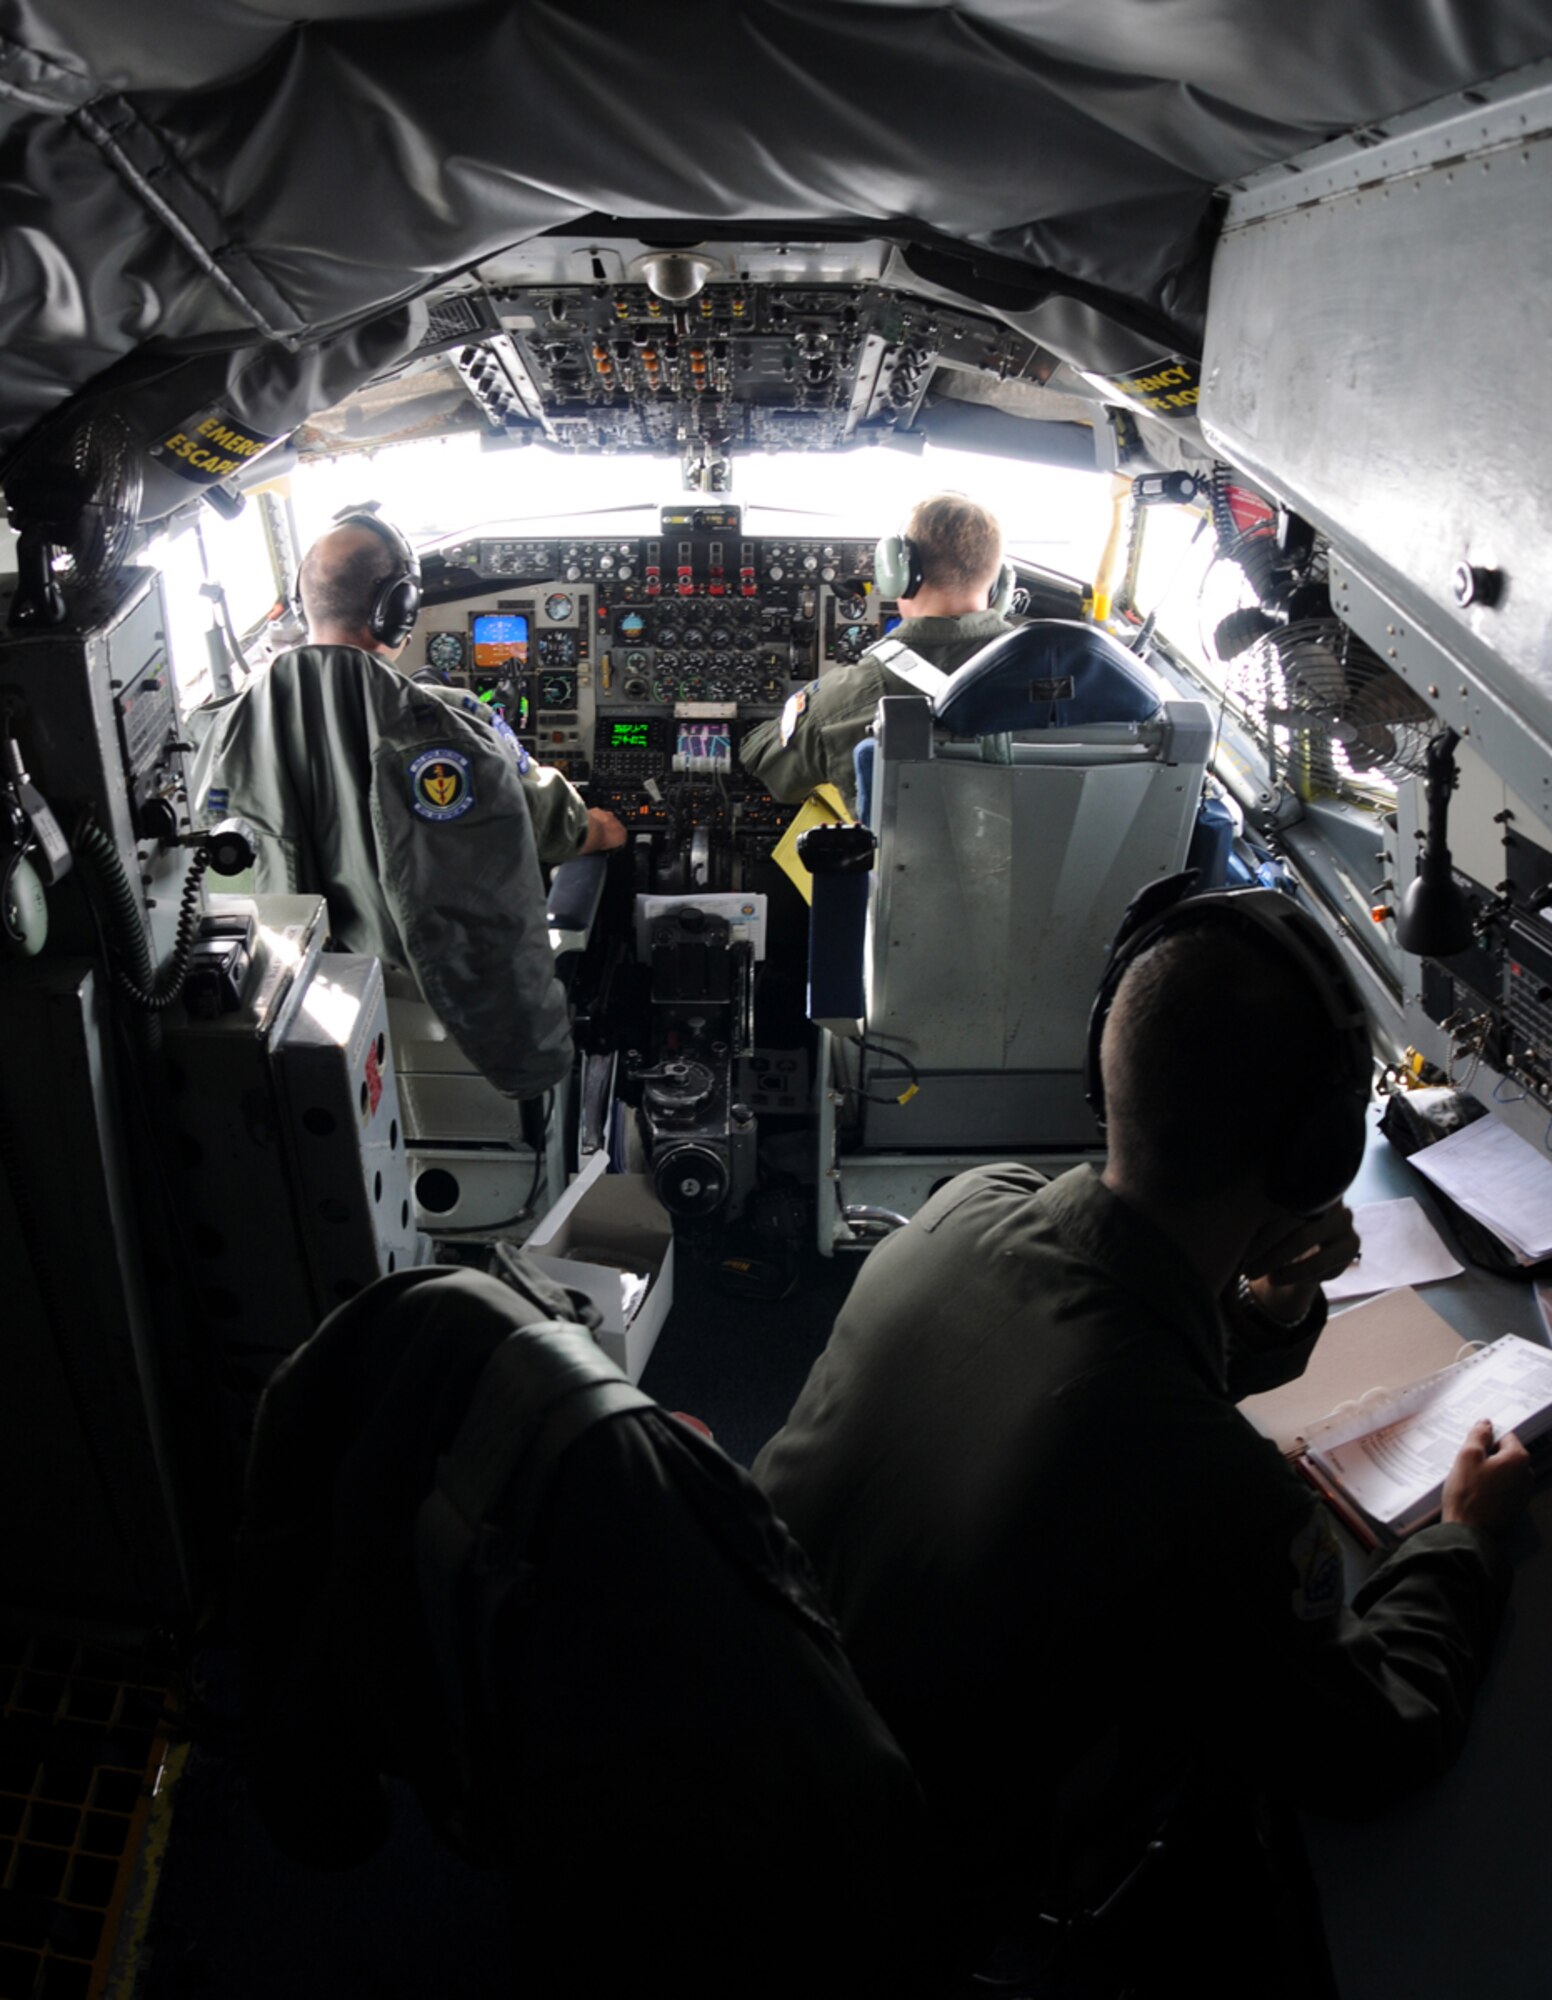 RAF MILDENHALL, England -- The crew of a 100th Air Refueling Wing KC-135 man the cockpit of their tanker during Allied Strike, a multinational exercise which ran from Aug. 2 to 5, and involved American, Belgian and German aircraft.  (U.S. Air Force photo/Staff Sgt. Austin M. May)